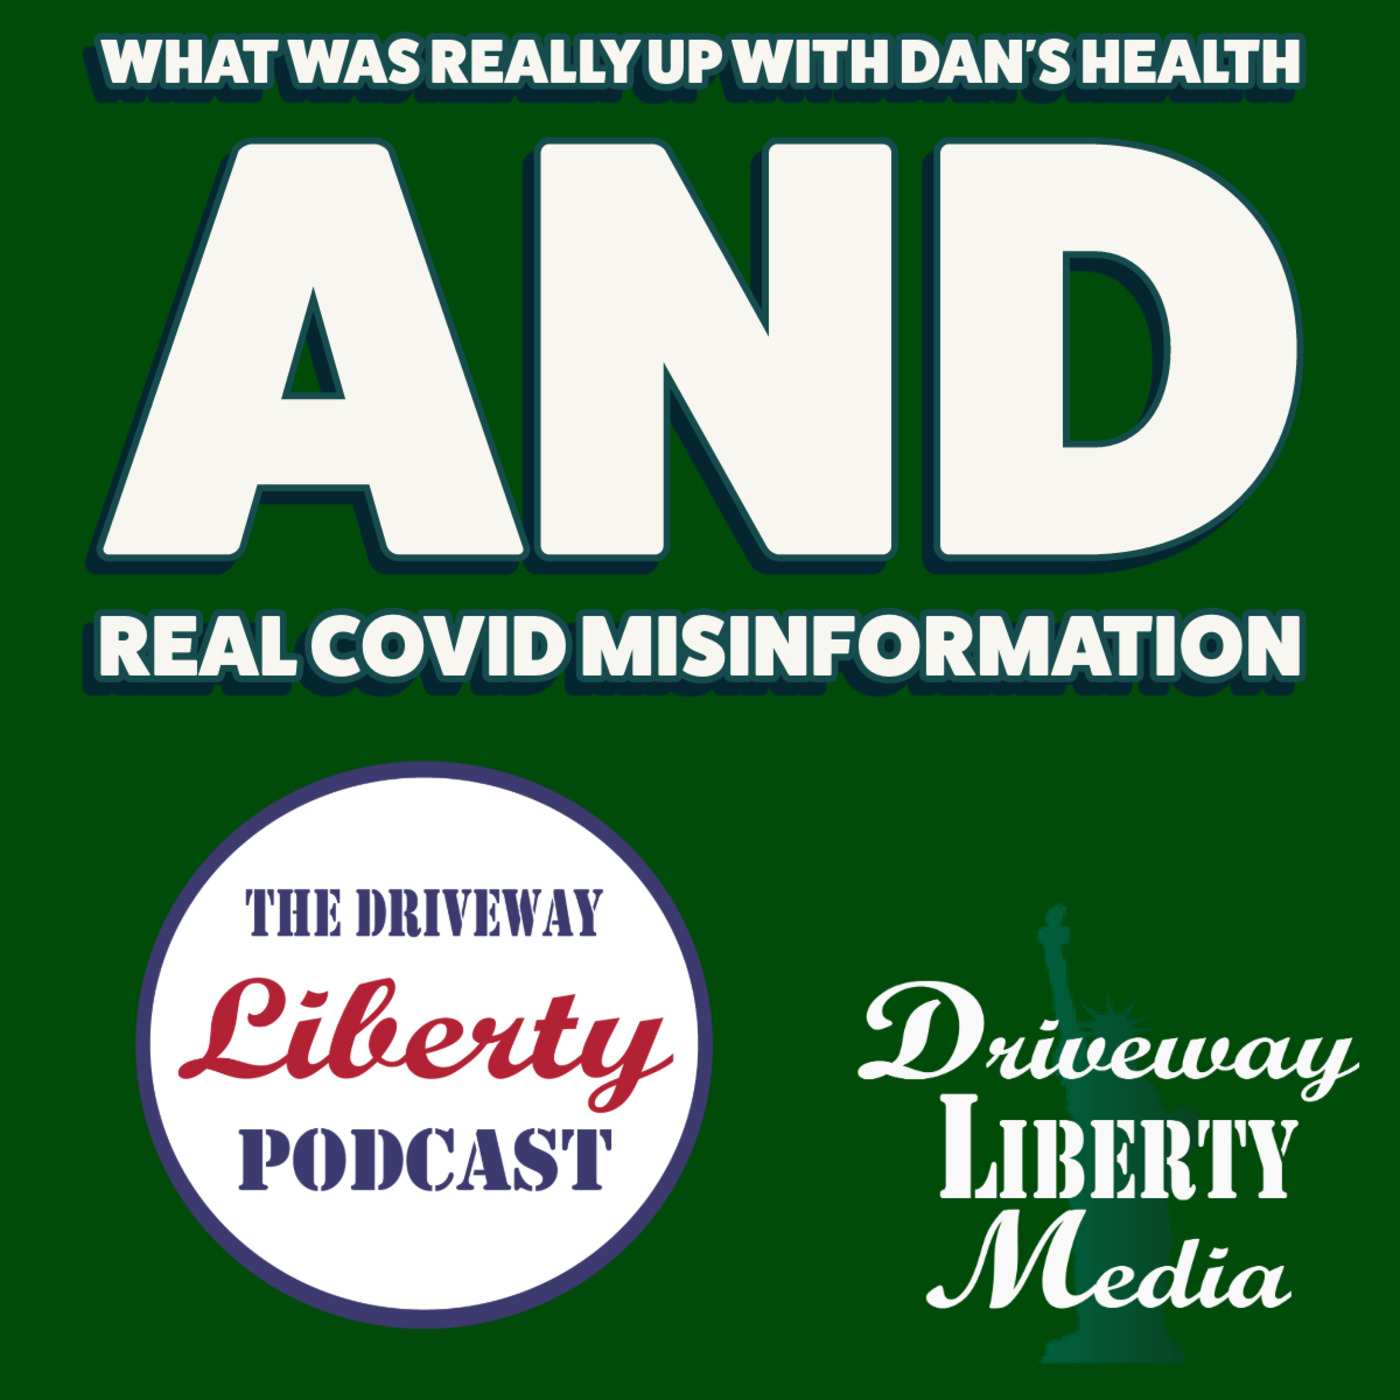 Episode 168: The REAL Covid Misinformation and What was Really Going with Dan's Health